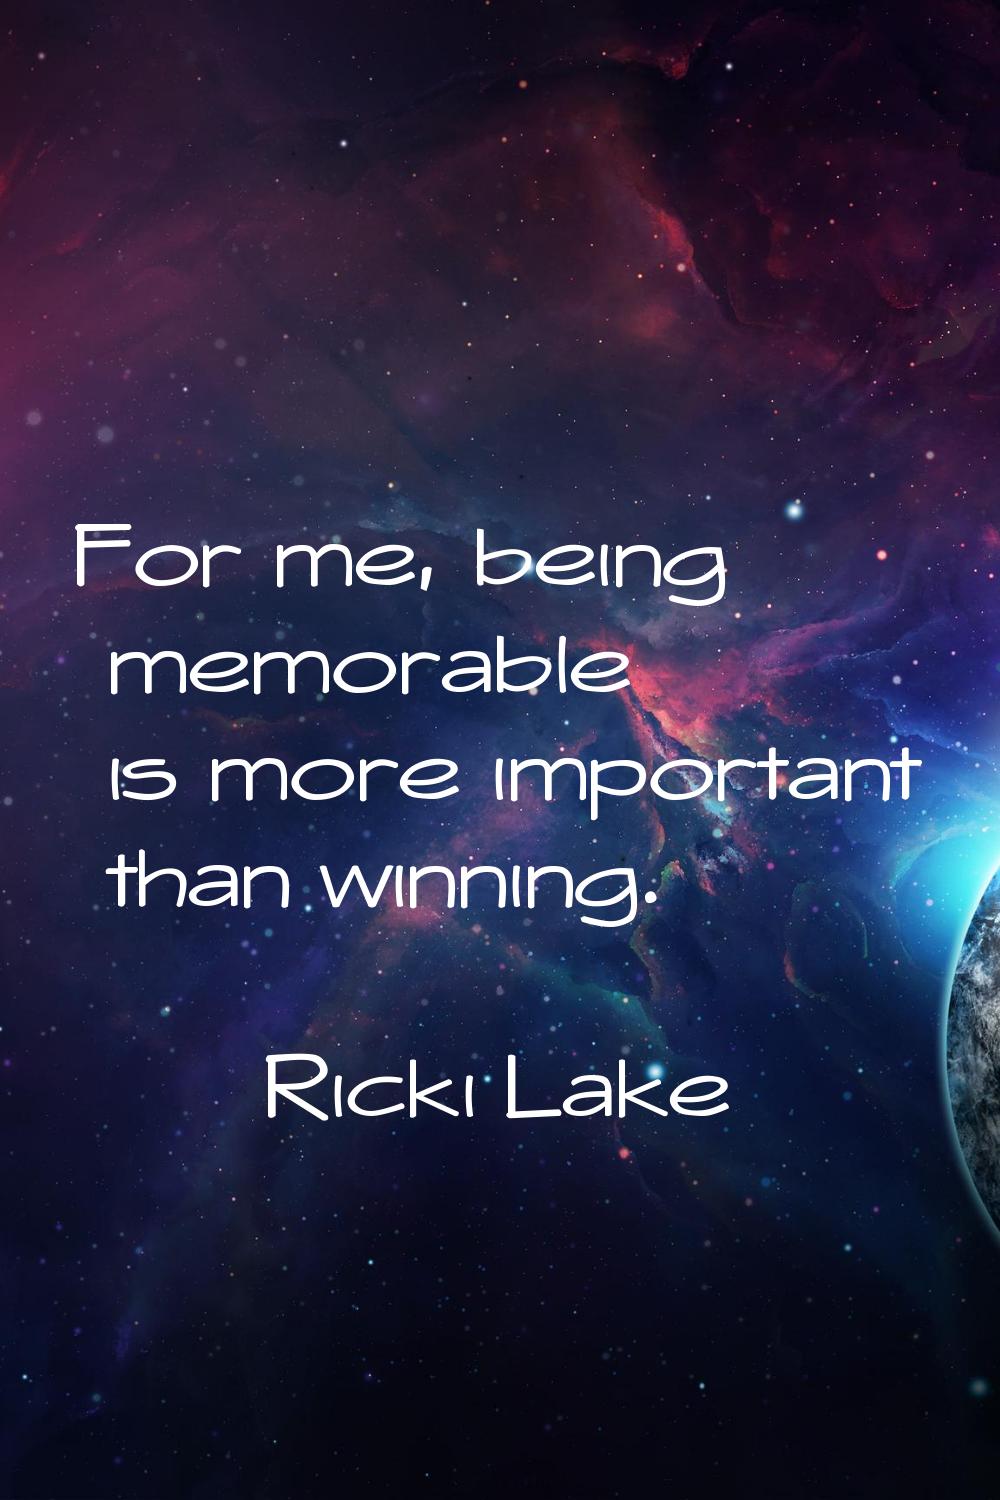 For me, being memorable is more important than winning.